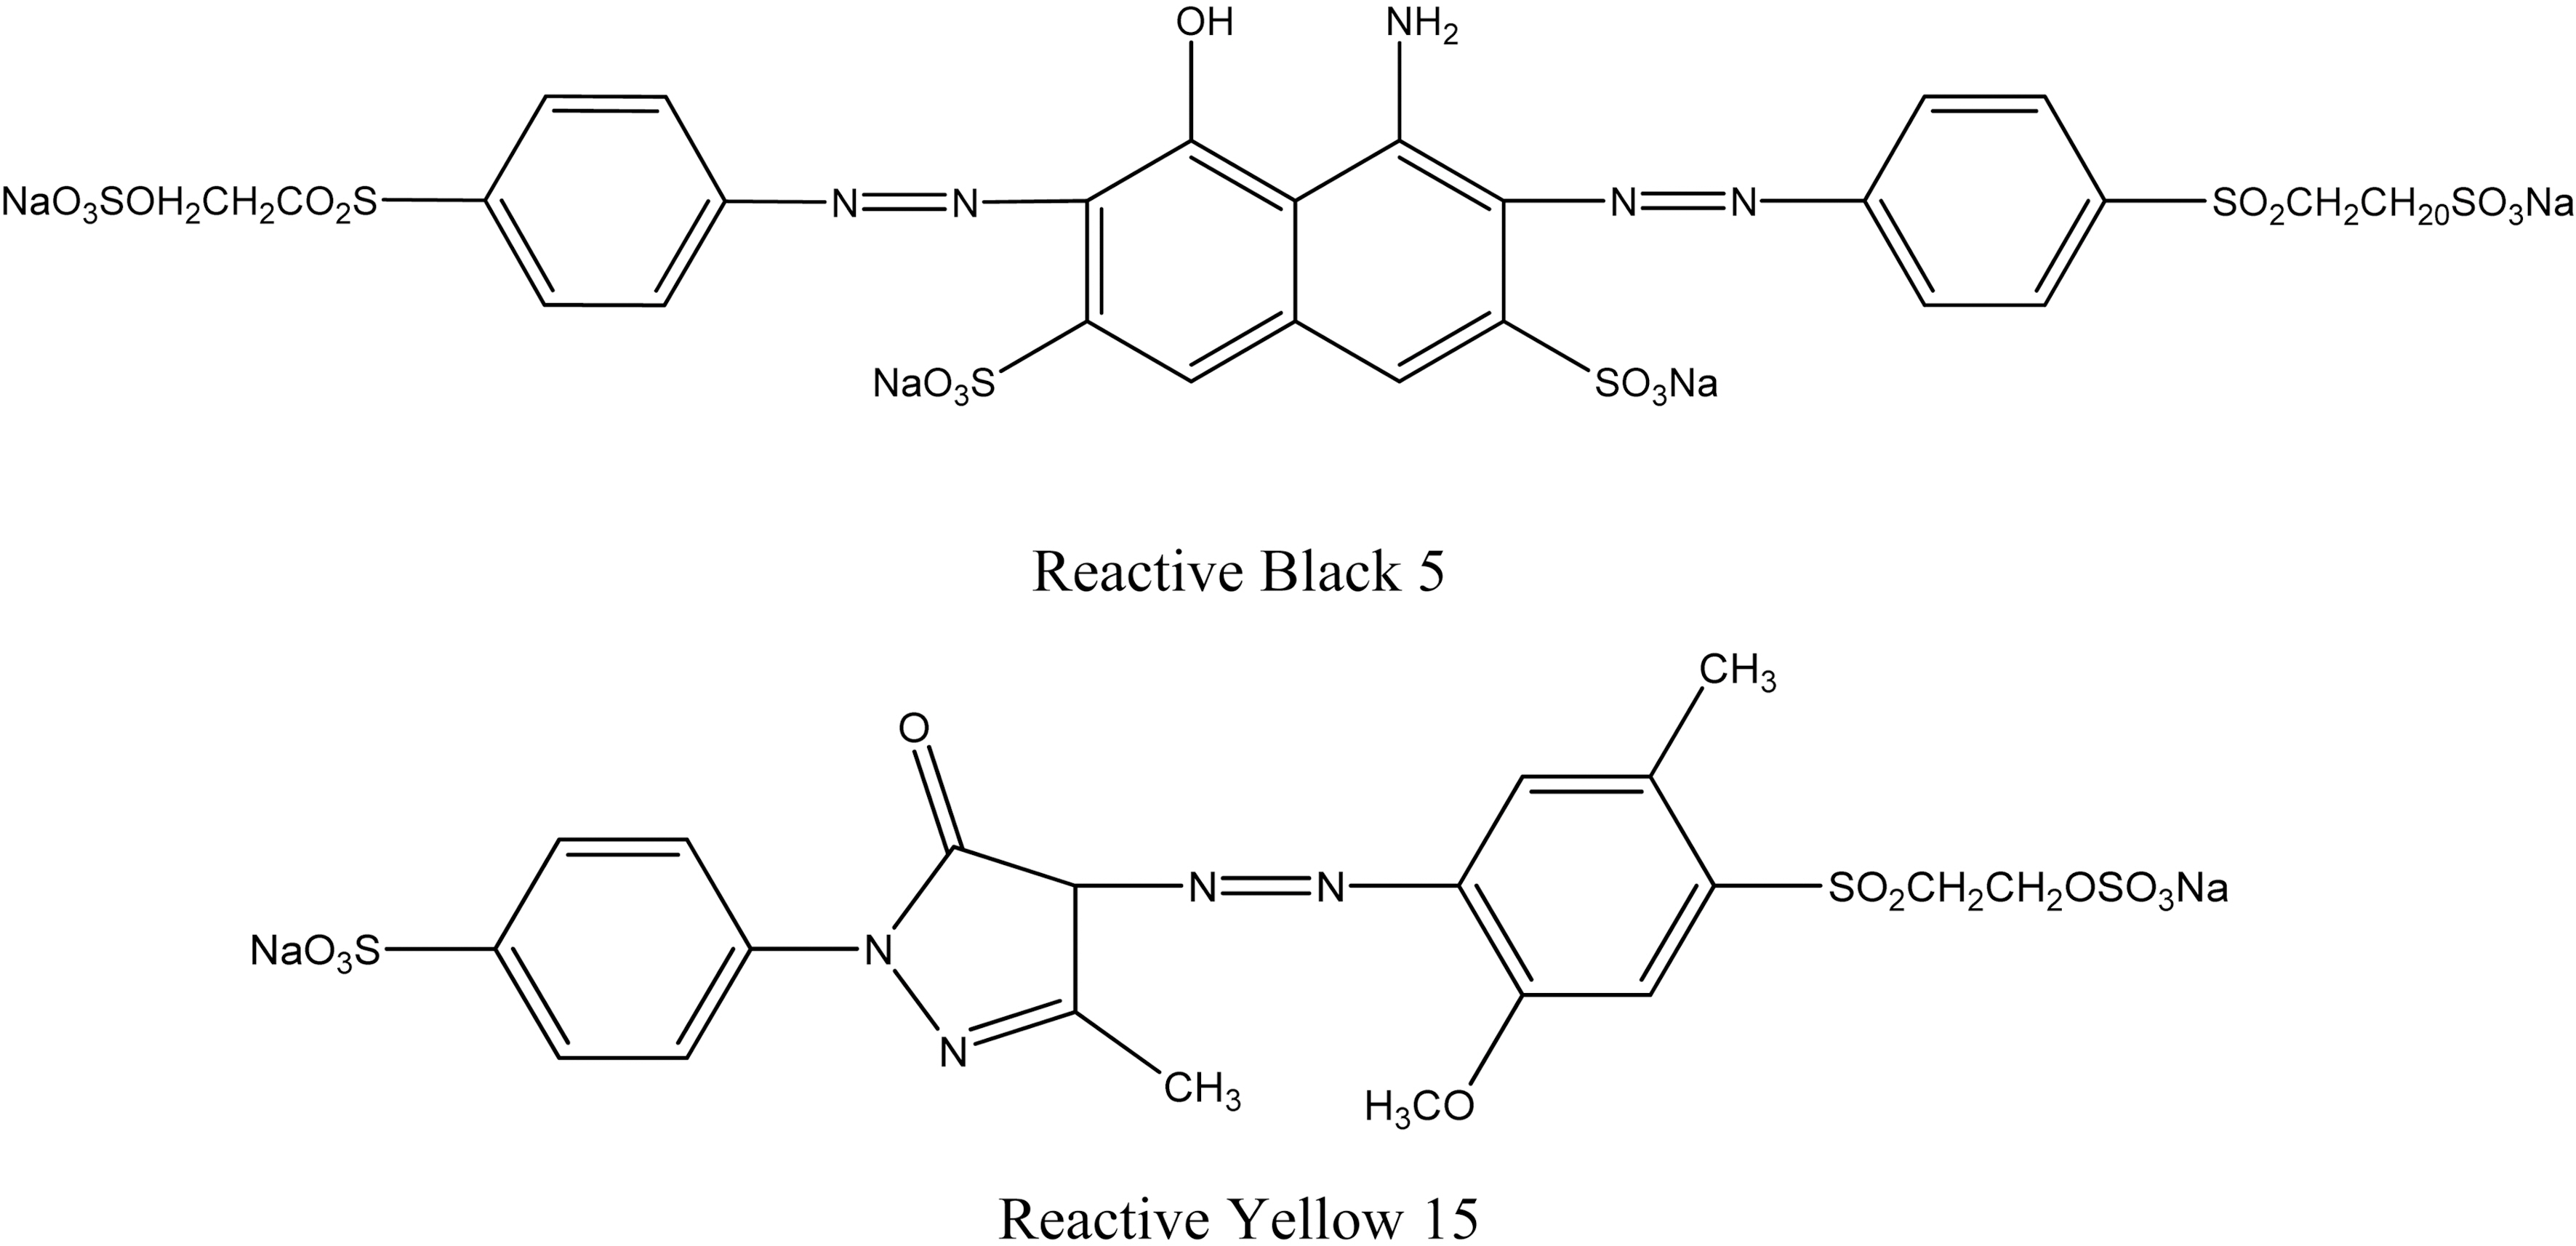 Structures of Reactive Black 5 and Reactive Yellow 15.